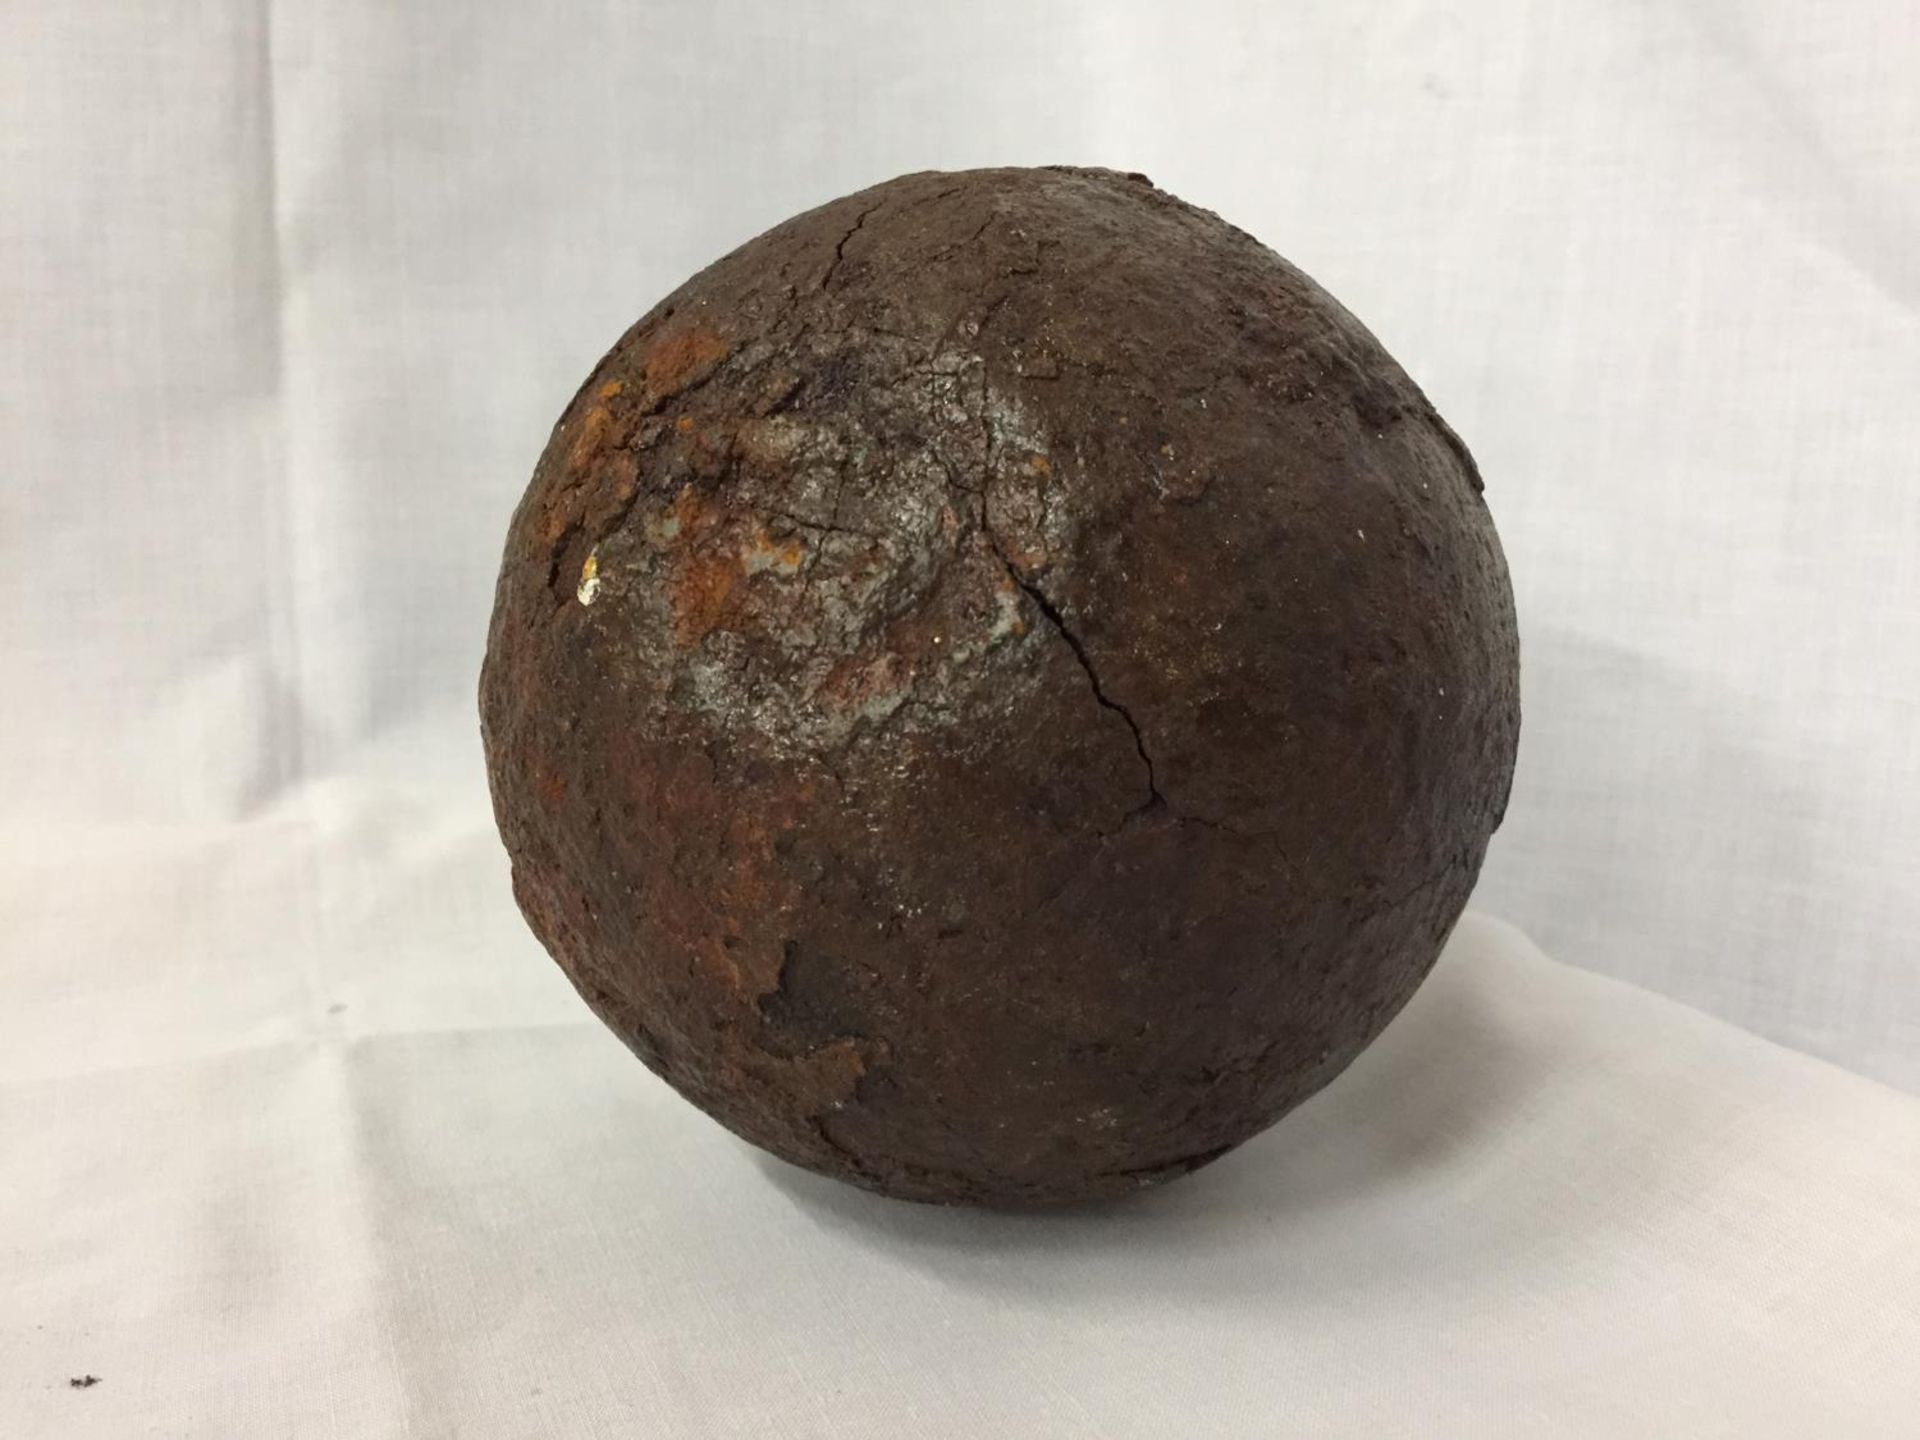 A LARGE CANNON BALL FROM H.M.S. ASSOCIATION WHICH SANK IN 1707 - Image 3 of 3